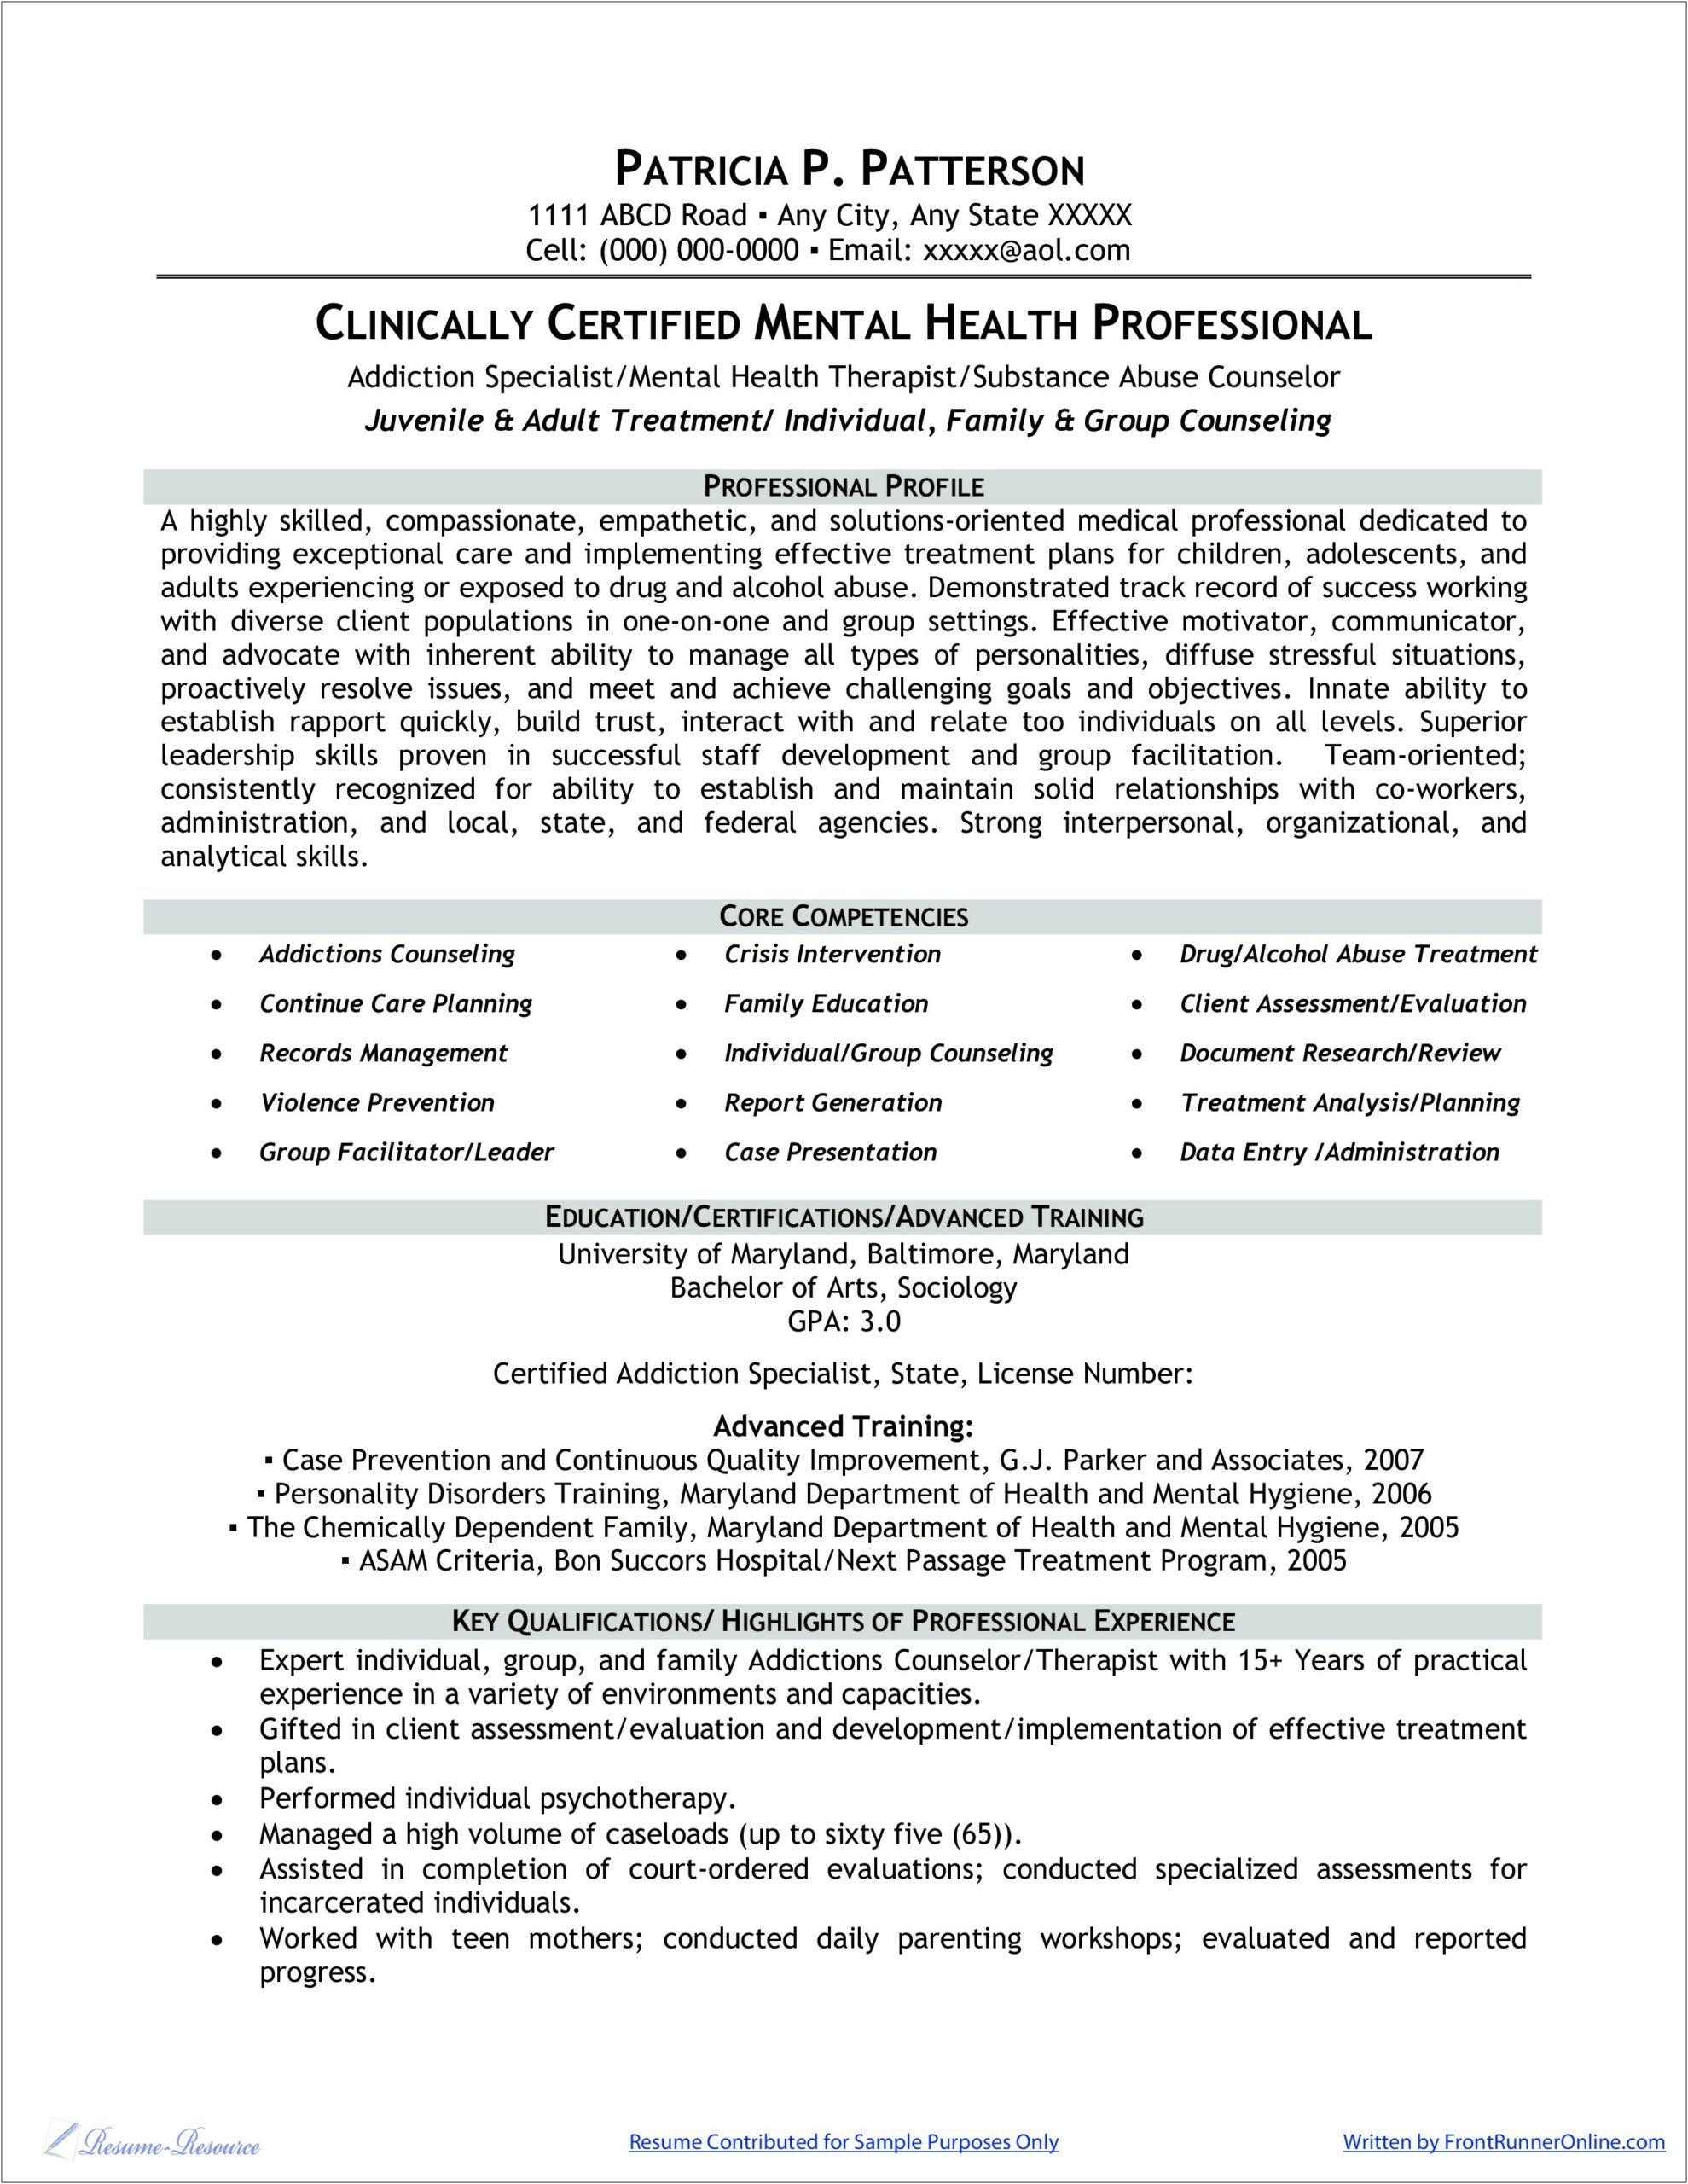 Resume Examples For Mental Health Professionals